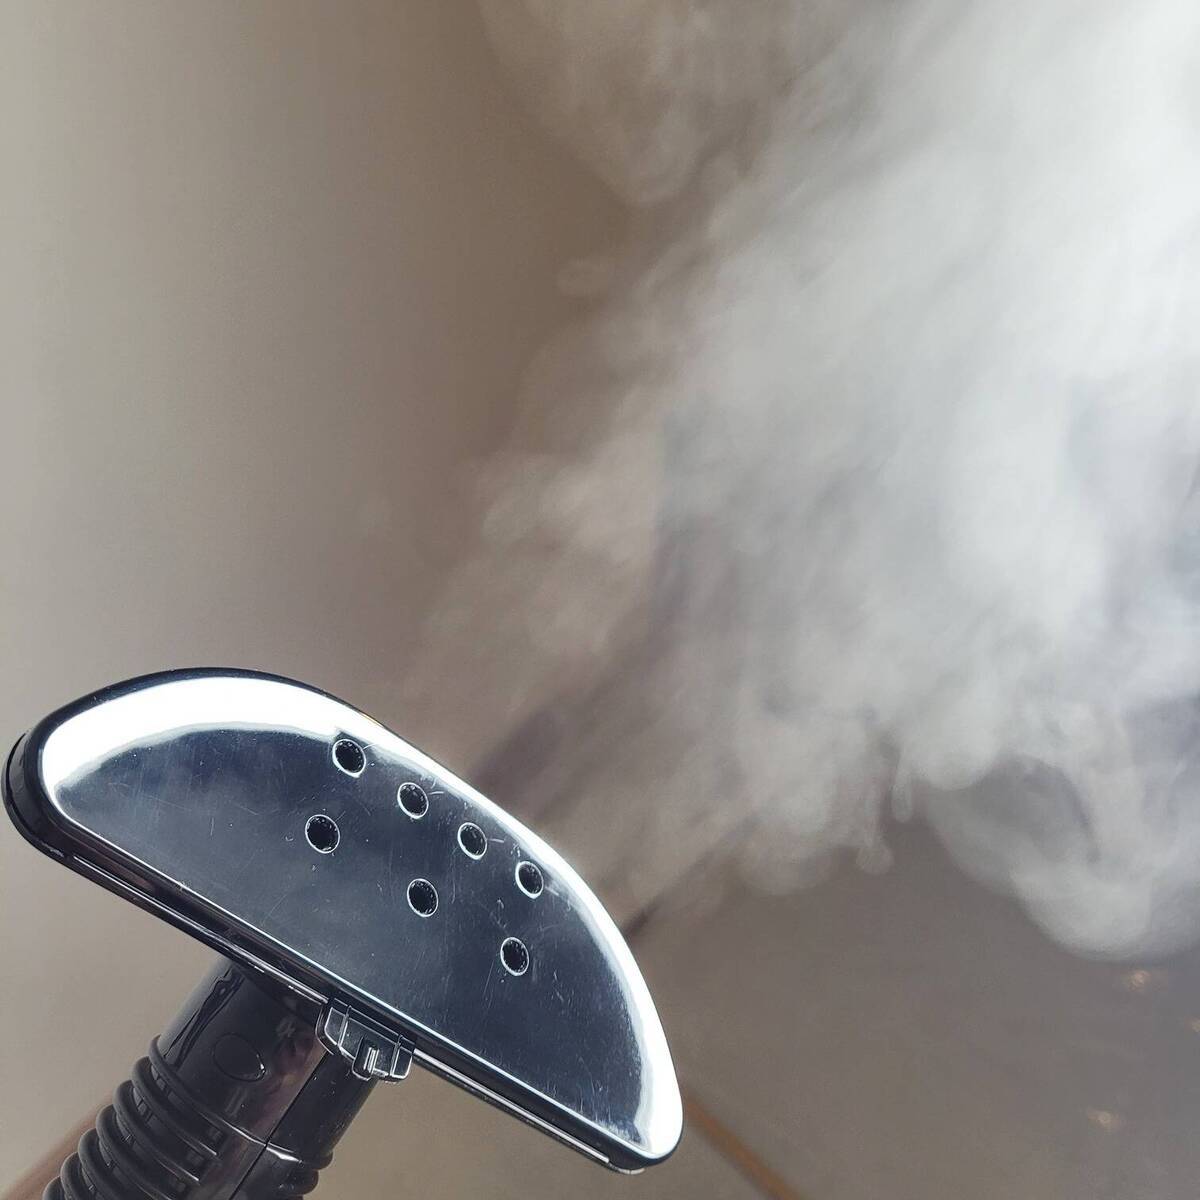 photo of a steamer emitting white hot steam into the air